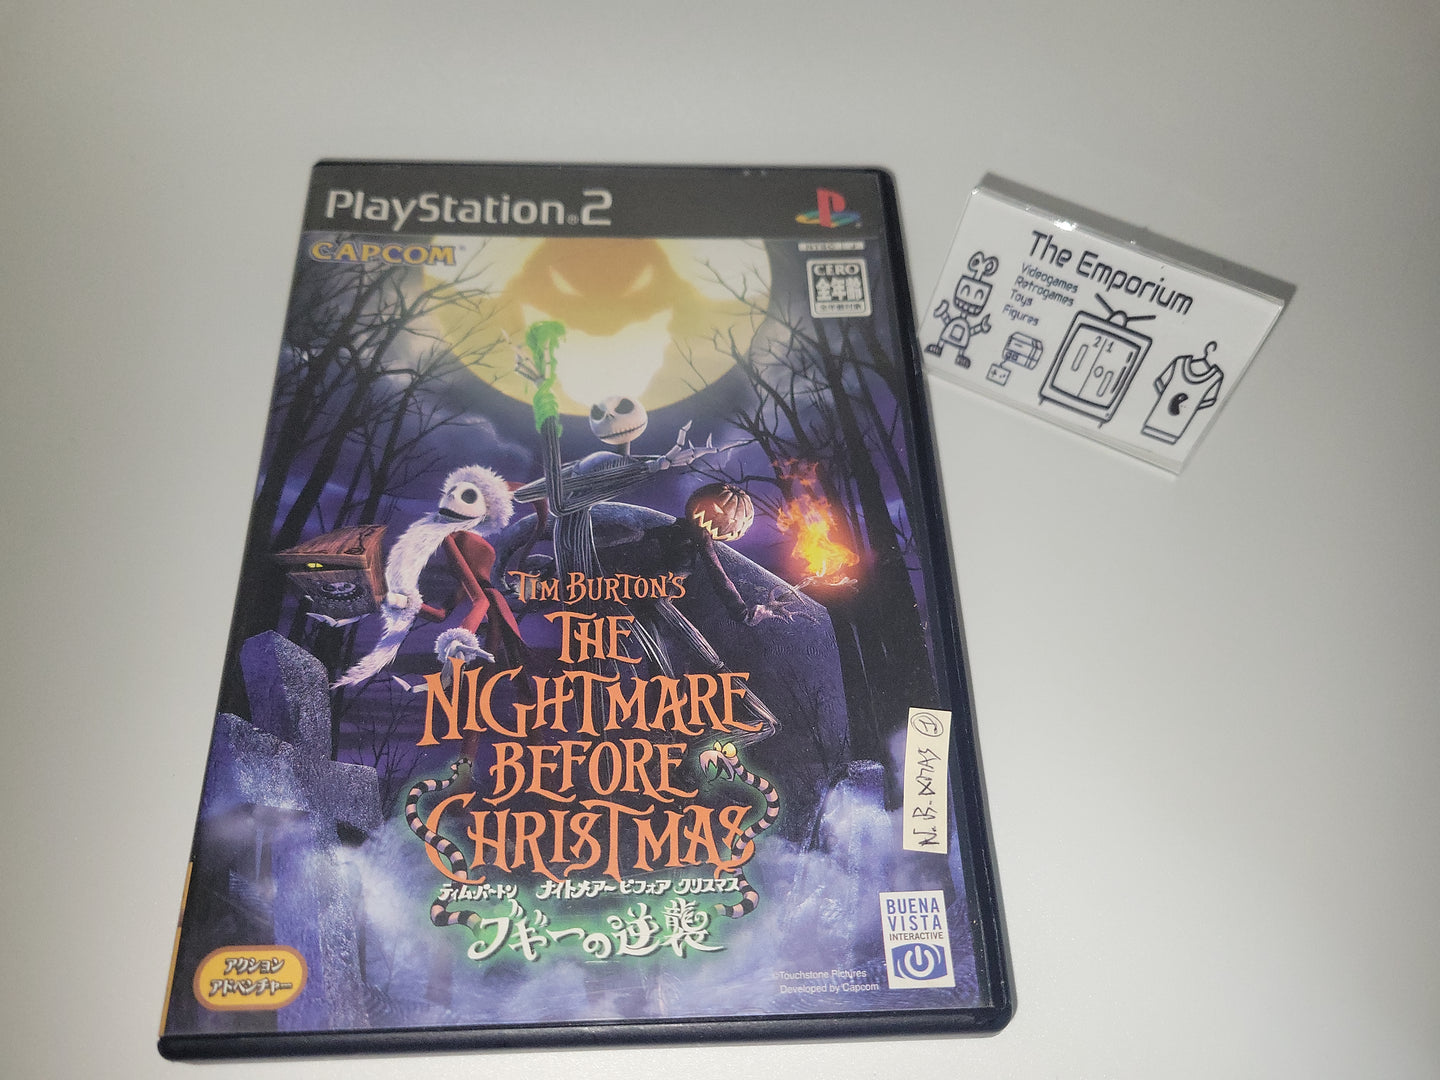 The Nightmare Before Christmas - Sony playstation 2